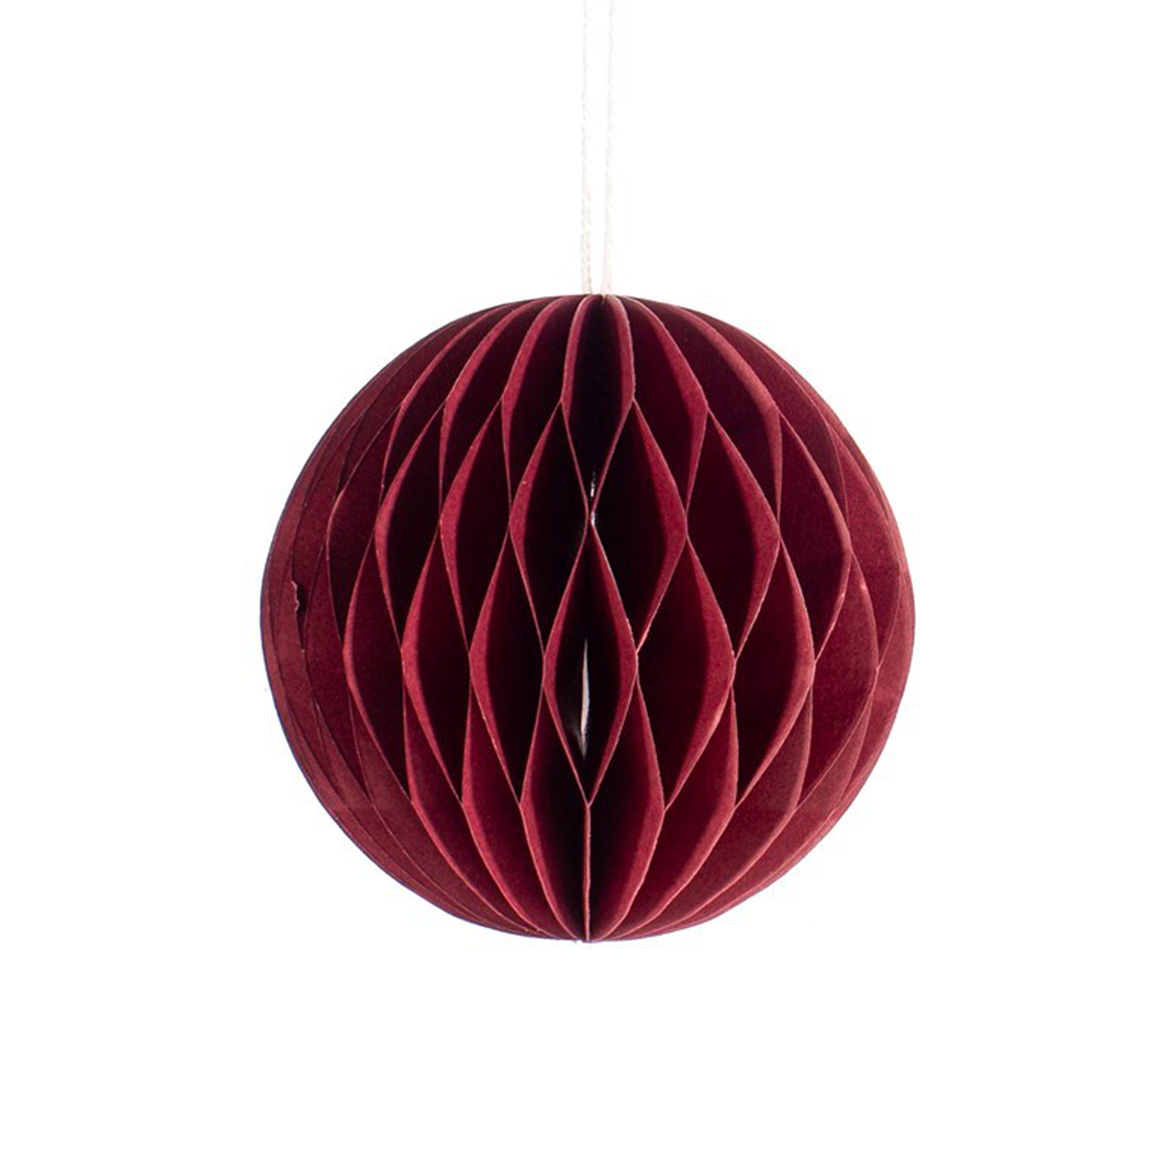 dark red paper hanging decoration in the shape of a circle. Hanging from string, honeycomb inside.